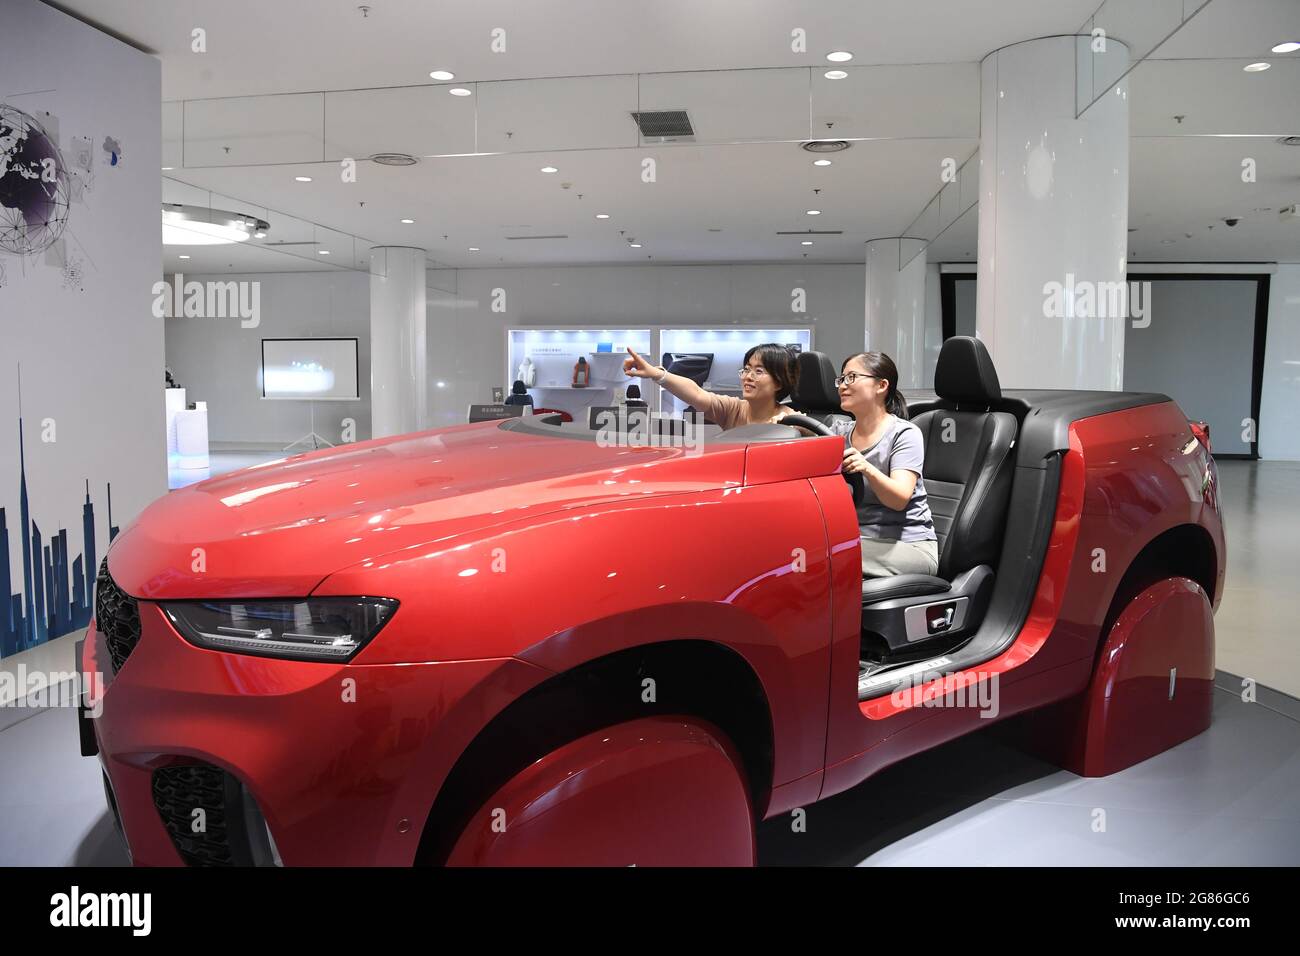 (210717) -- BAODING, July 17, 2021 (Xinhua) -- Visitors try 5G-based intelligent driving technology at the Haval technology center of Great Wall Motor (GWM) in Baoding, north China's Hebei Province, July 15, 2021. More than 1.1 million new-energy cars have been registered in China in the first half of this year, a record high for the same period in any year, the Ministry of Public Security said on July 6.   The number represents an over 200 percent rise from the same period last year and accounts for nearly eight percent of the total car registrations.    GWM, China's leading sport utility veh Stock Photo